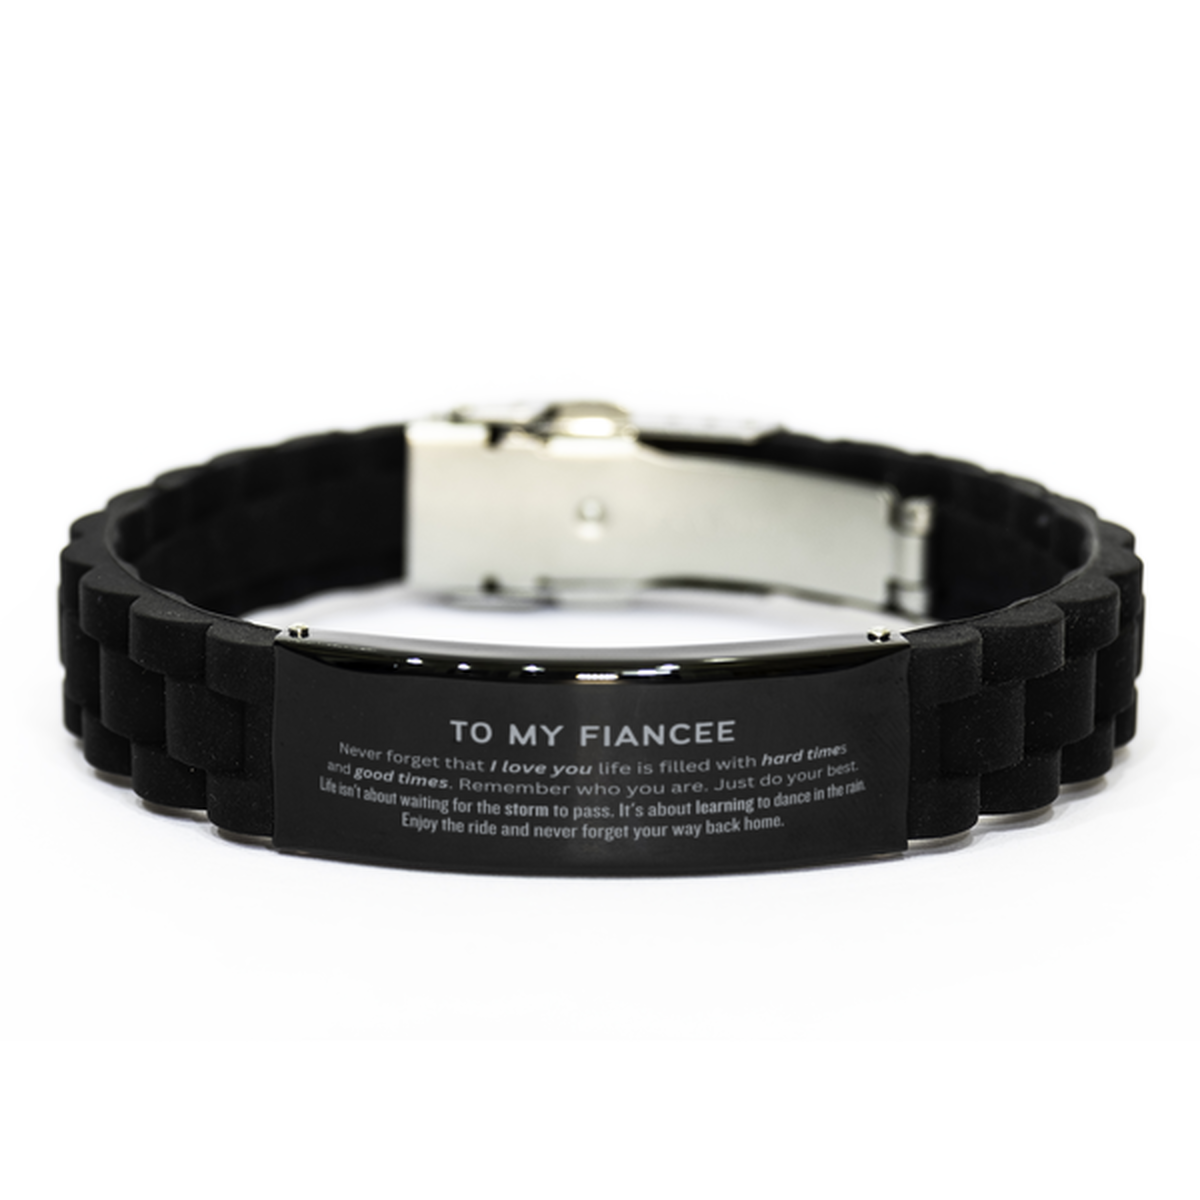 Christmas Fiancee Black Glidelock Clasp Bracelet Gifts, To My Fiancee Birthday Thank You Gifts For Fiancee, Graduation Unique Gifts For Fiancee To My Fiancee Never forget that I love you life is filled with hard times and good times. Remember who you are.